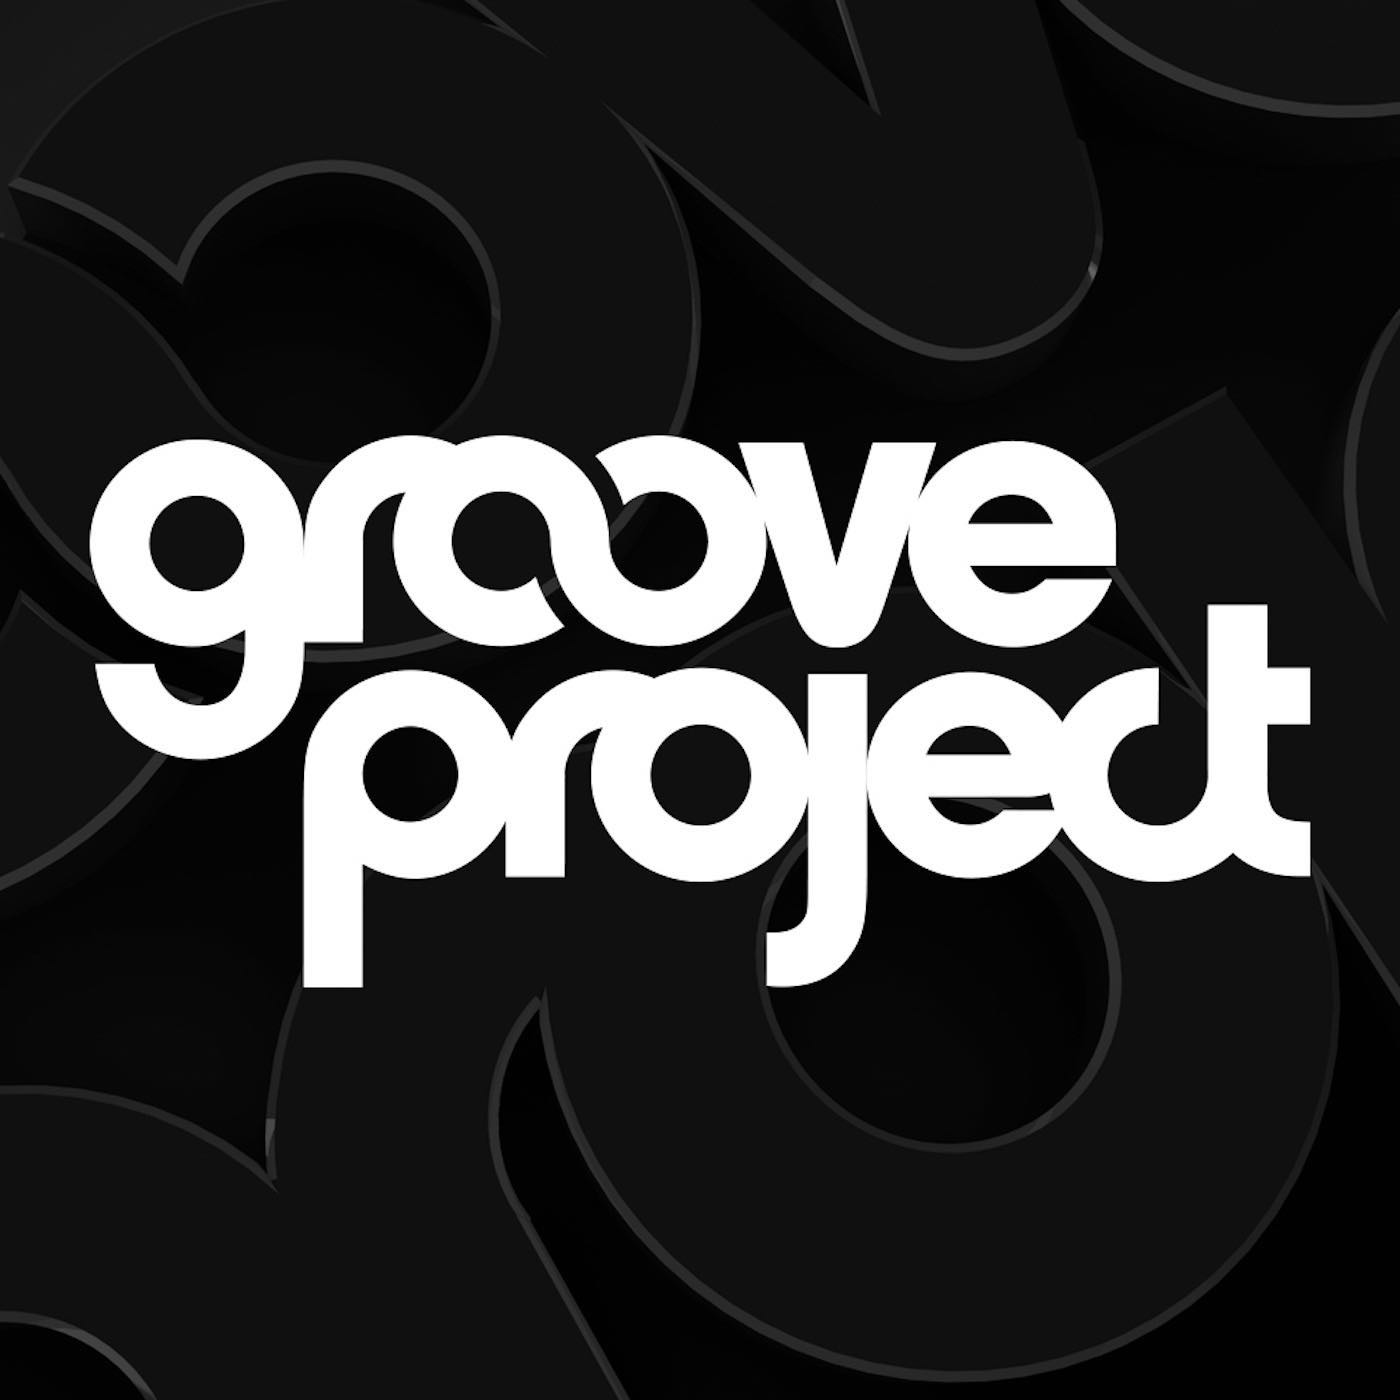 Groove Project Podcast